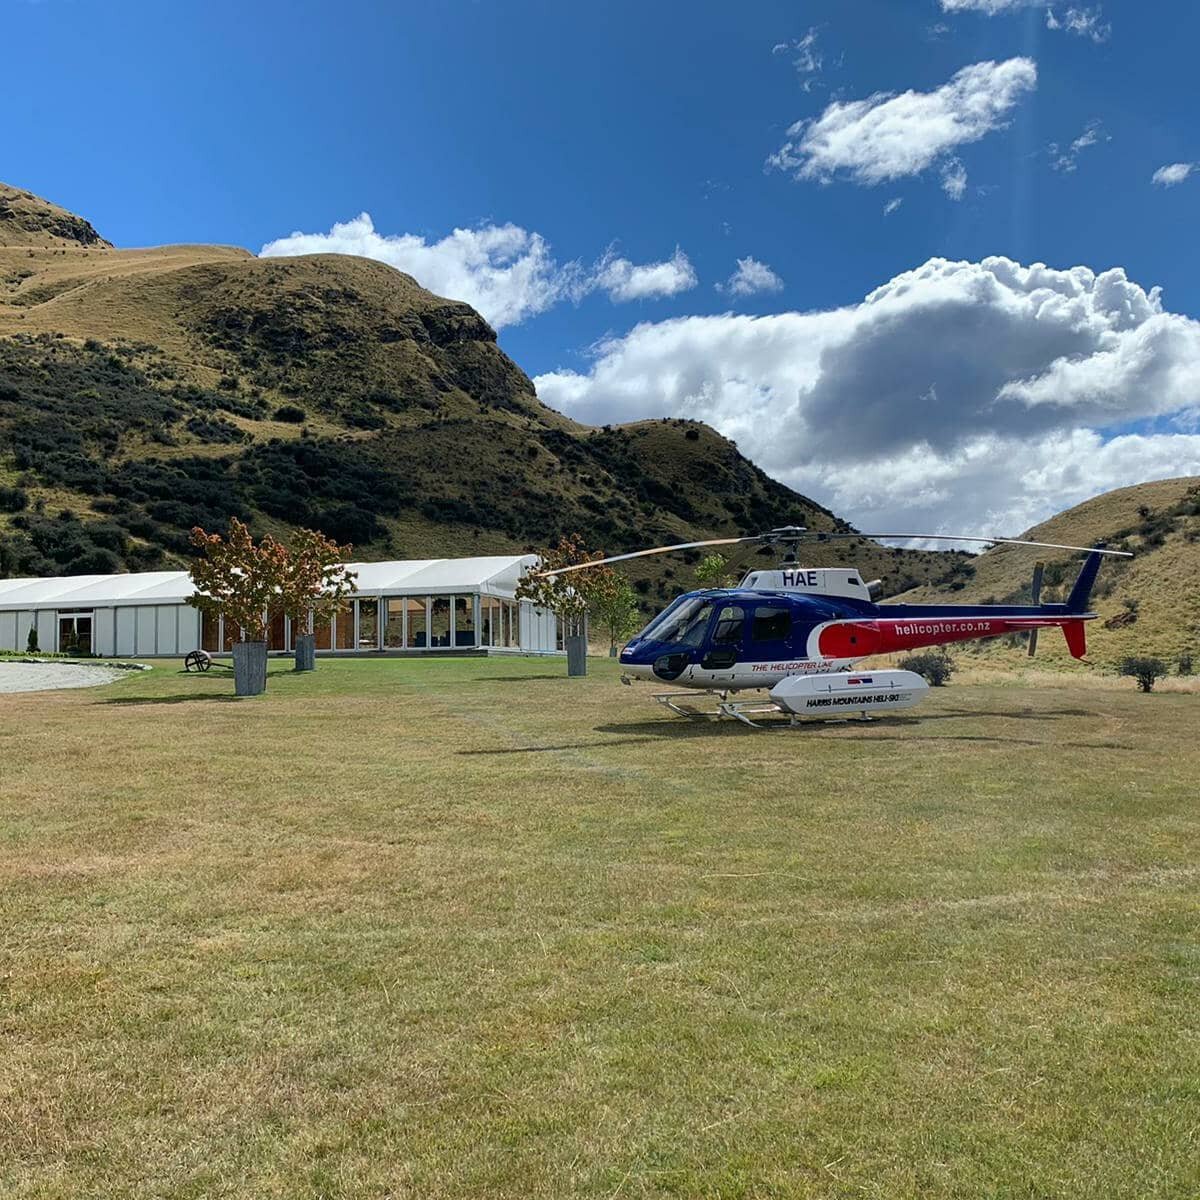 A pleasure being part of the Destination Queenstown famil today.  Thanks to our amazing event partners - 
@nomadsafaris 
@thehelicopterline 
@artisan_catering 
@mojobandqueenstown 
@queenstownnz
@rippleexperiencenz